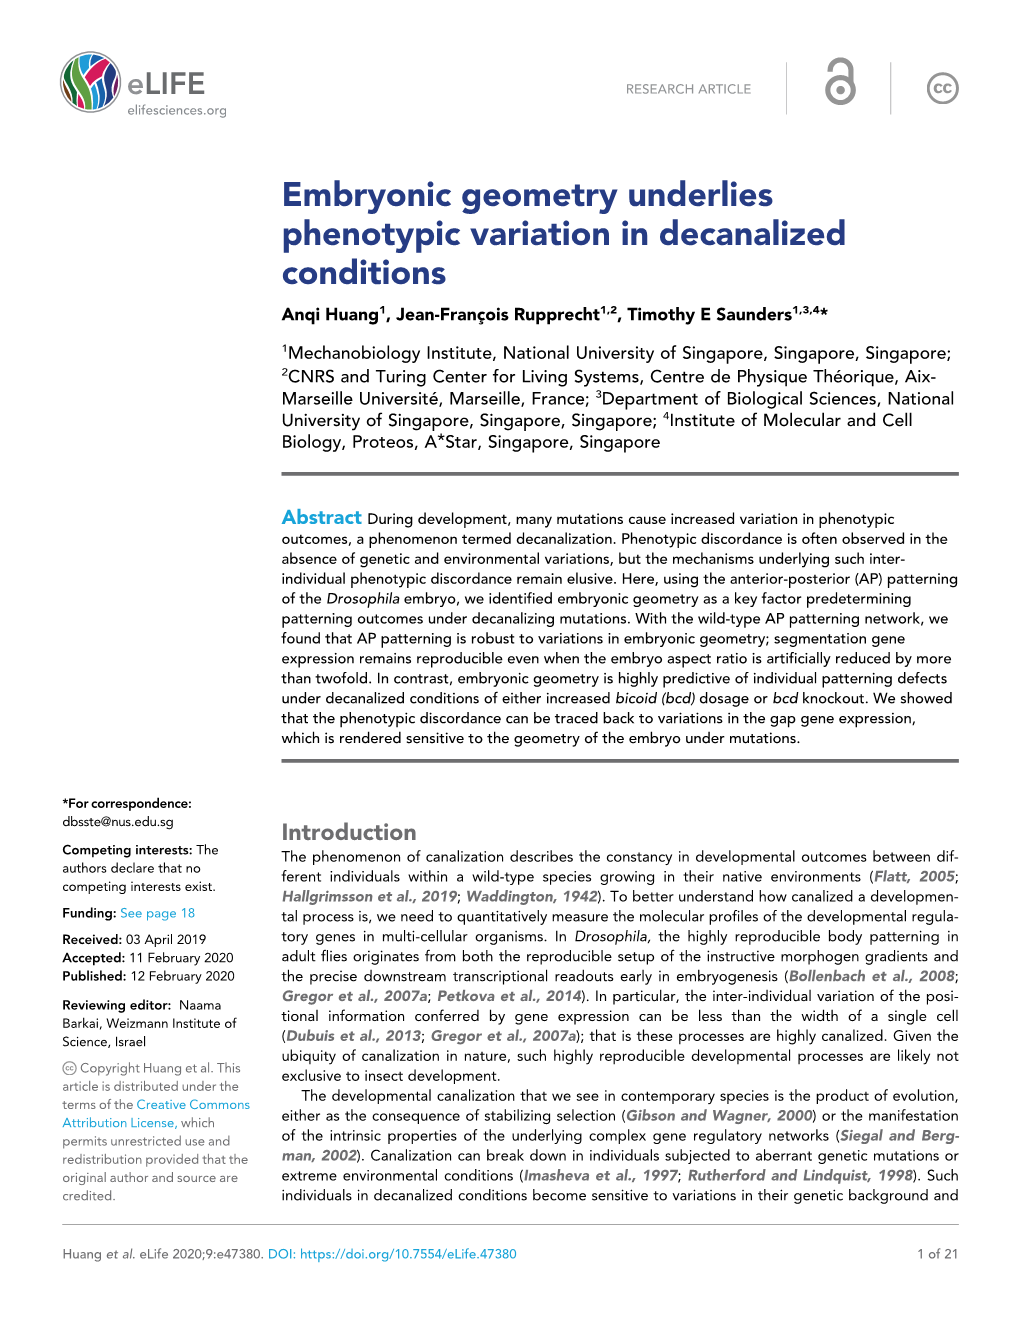 Embryonic Geometry Underlies Phenotypic Variation in Decanalized Conditions Anqi Huang1, Jean-Franc¸Ois Rupprecht1,2, Timothy E Saunders1,3,4*